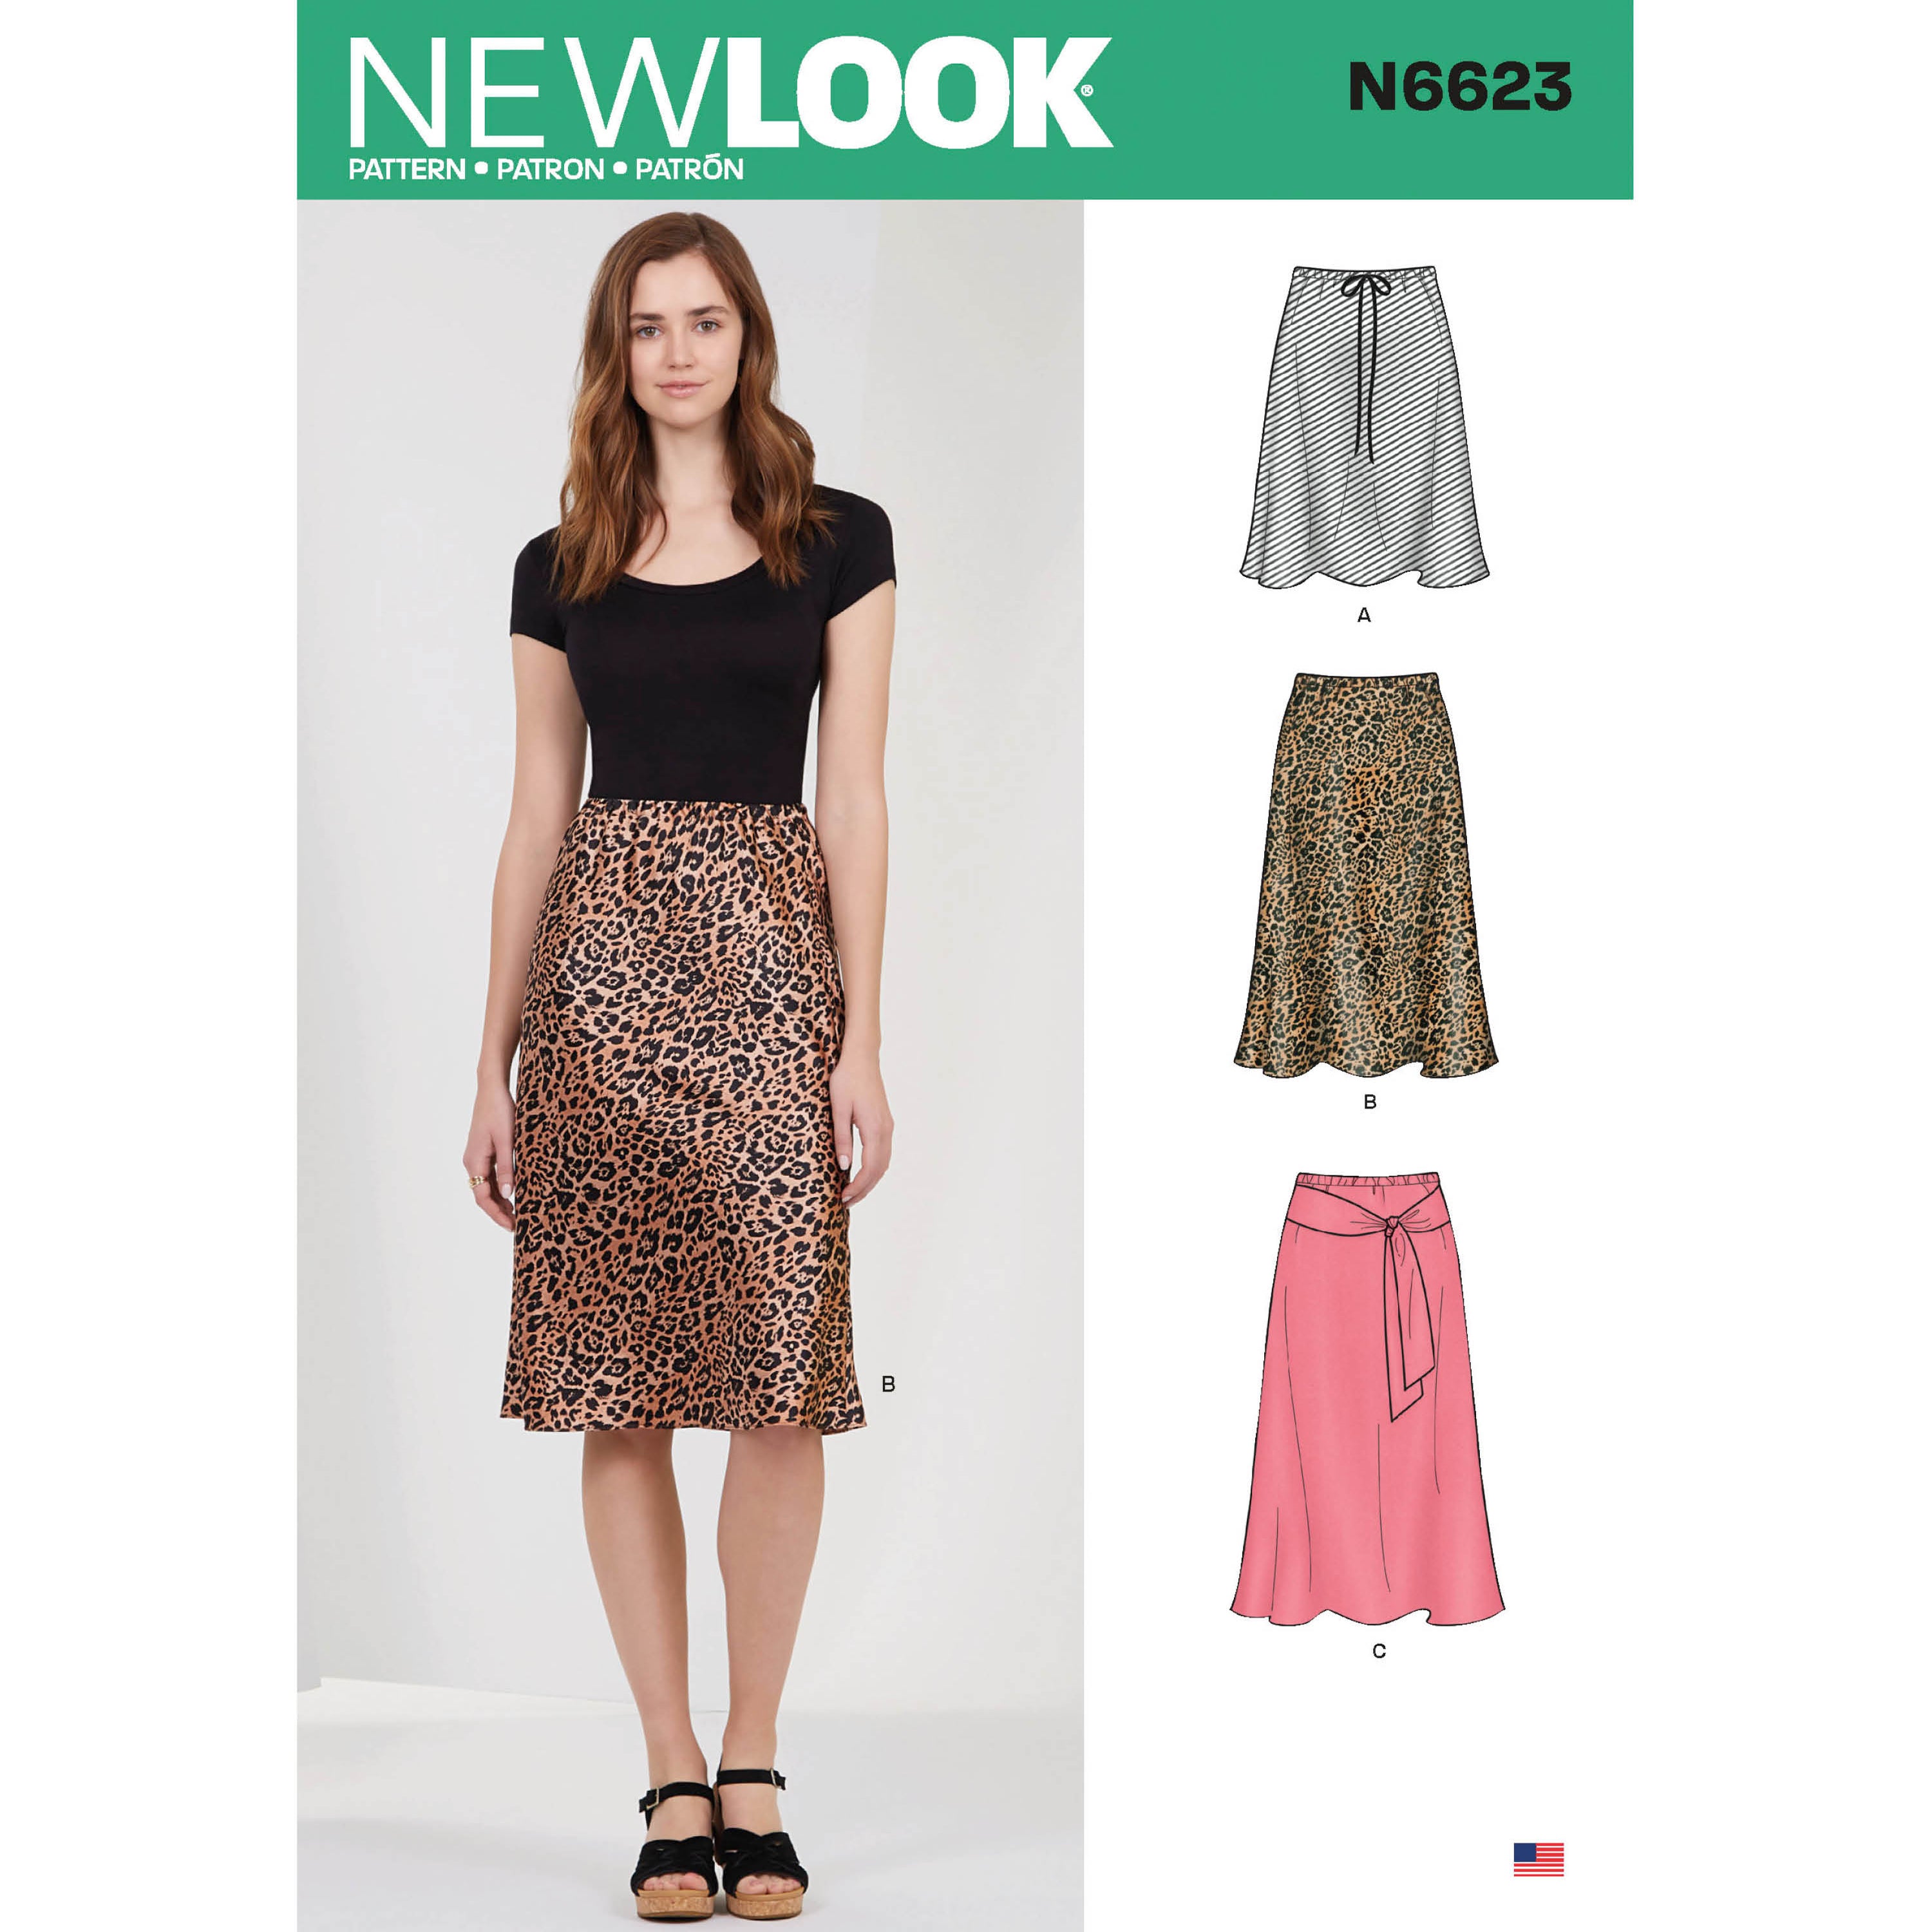 New Look Sewing Pattern N6623 - Misses' Skirts in Three Lengths ...